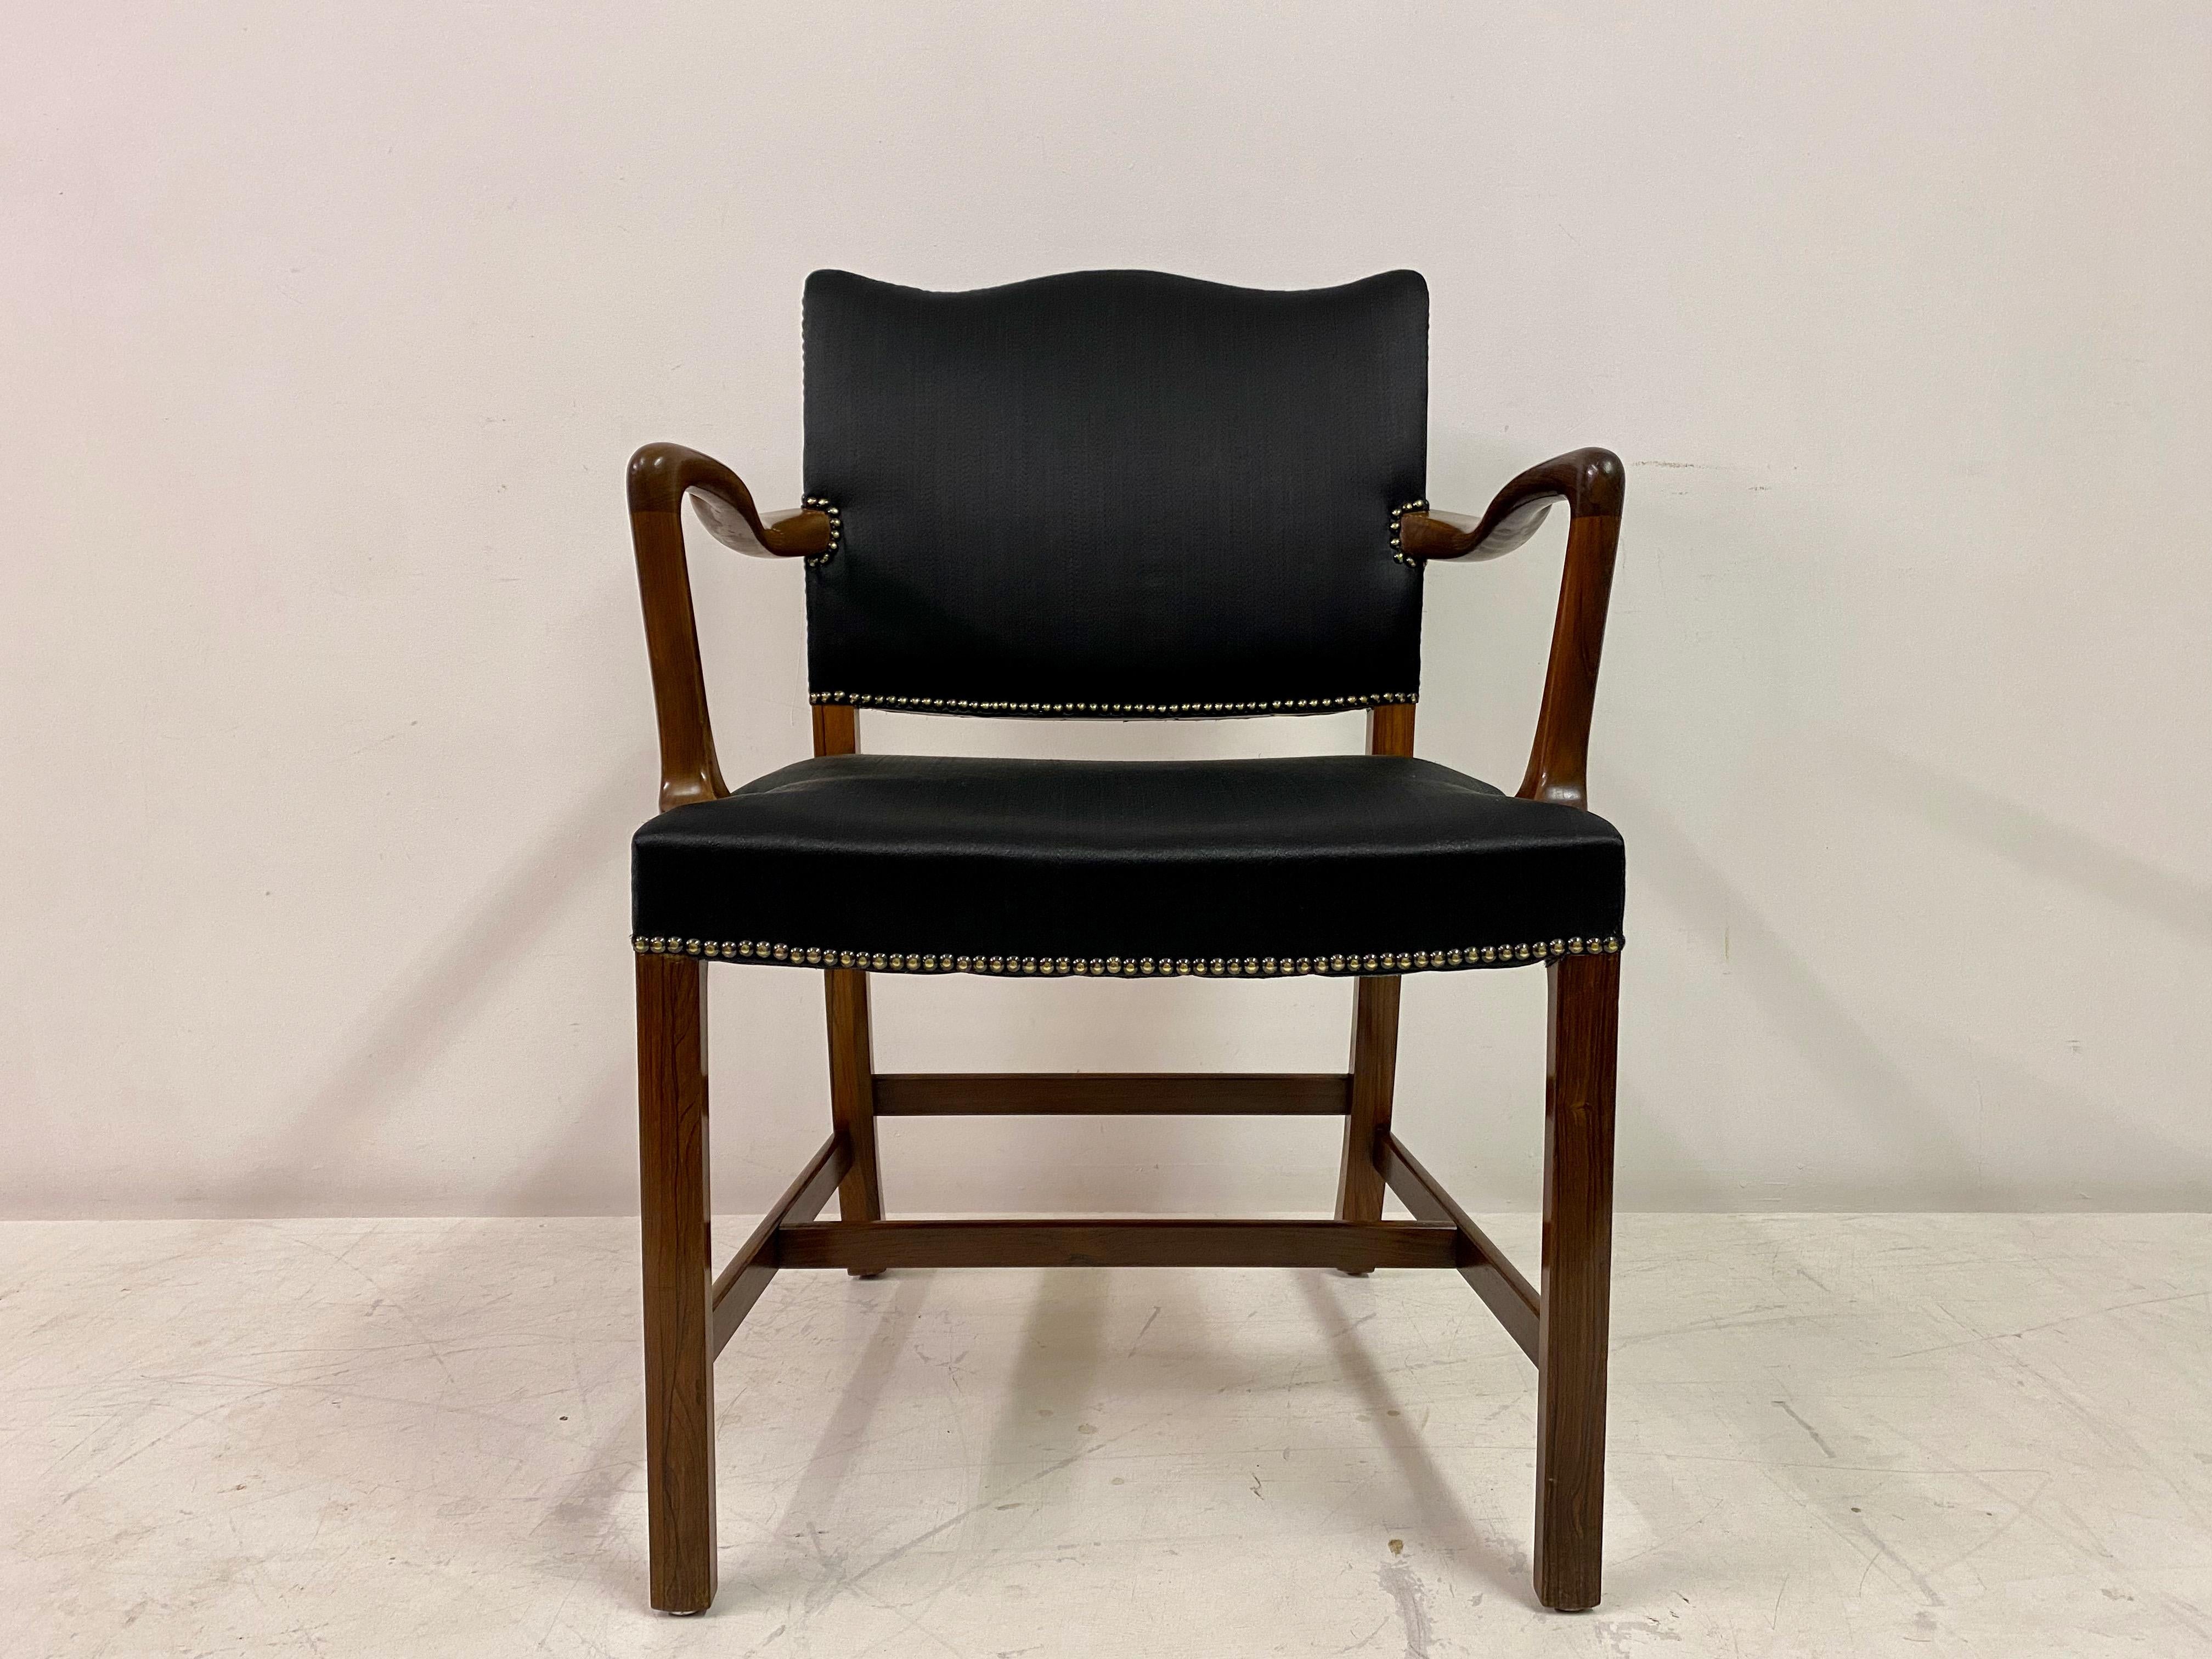 1940s Danish Armchair or Desk Chair by Ole Wanscher In Good Condition For Sale In London, London